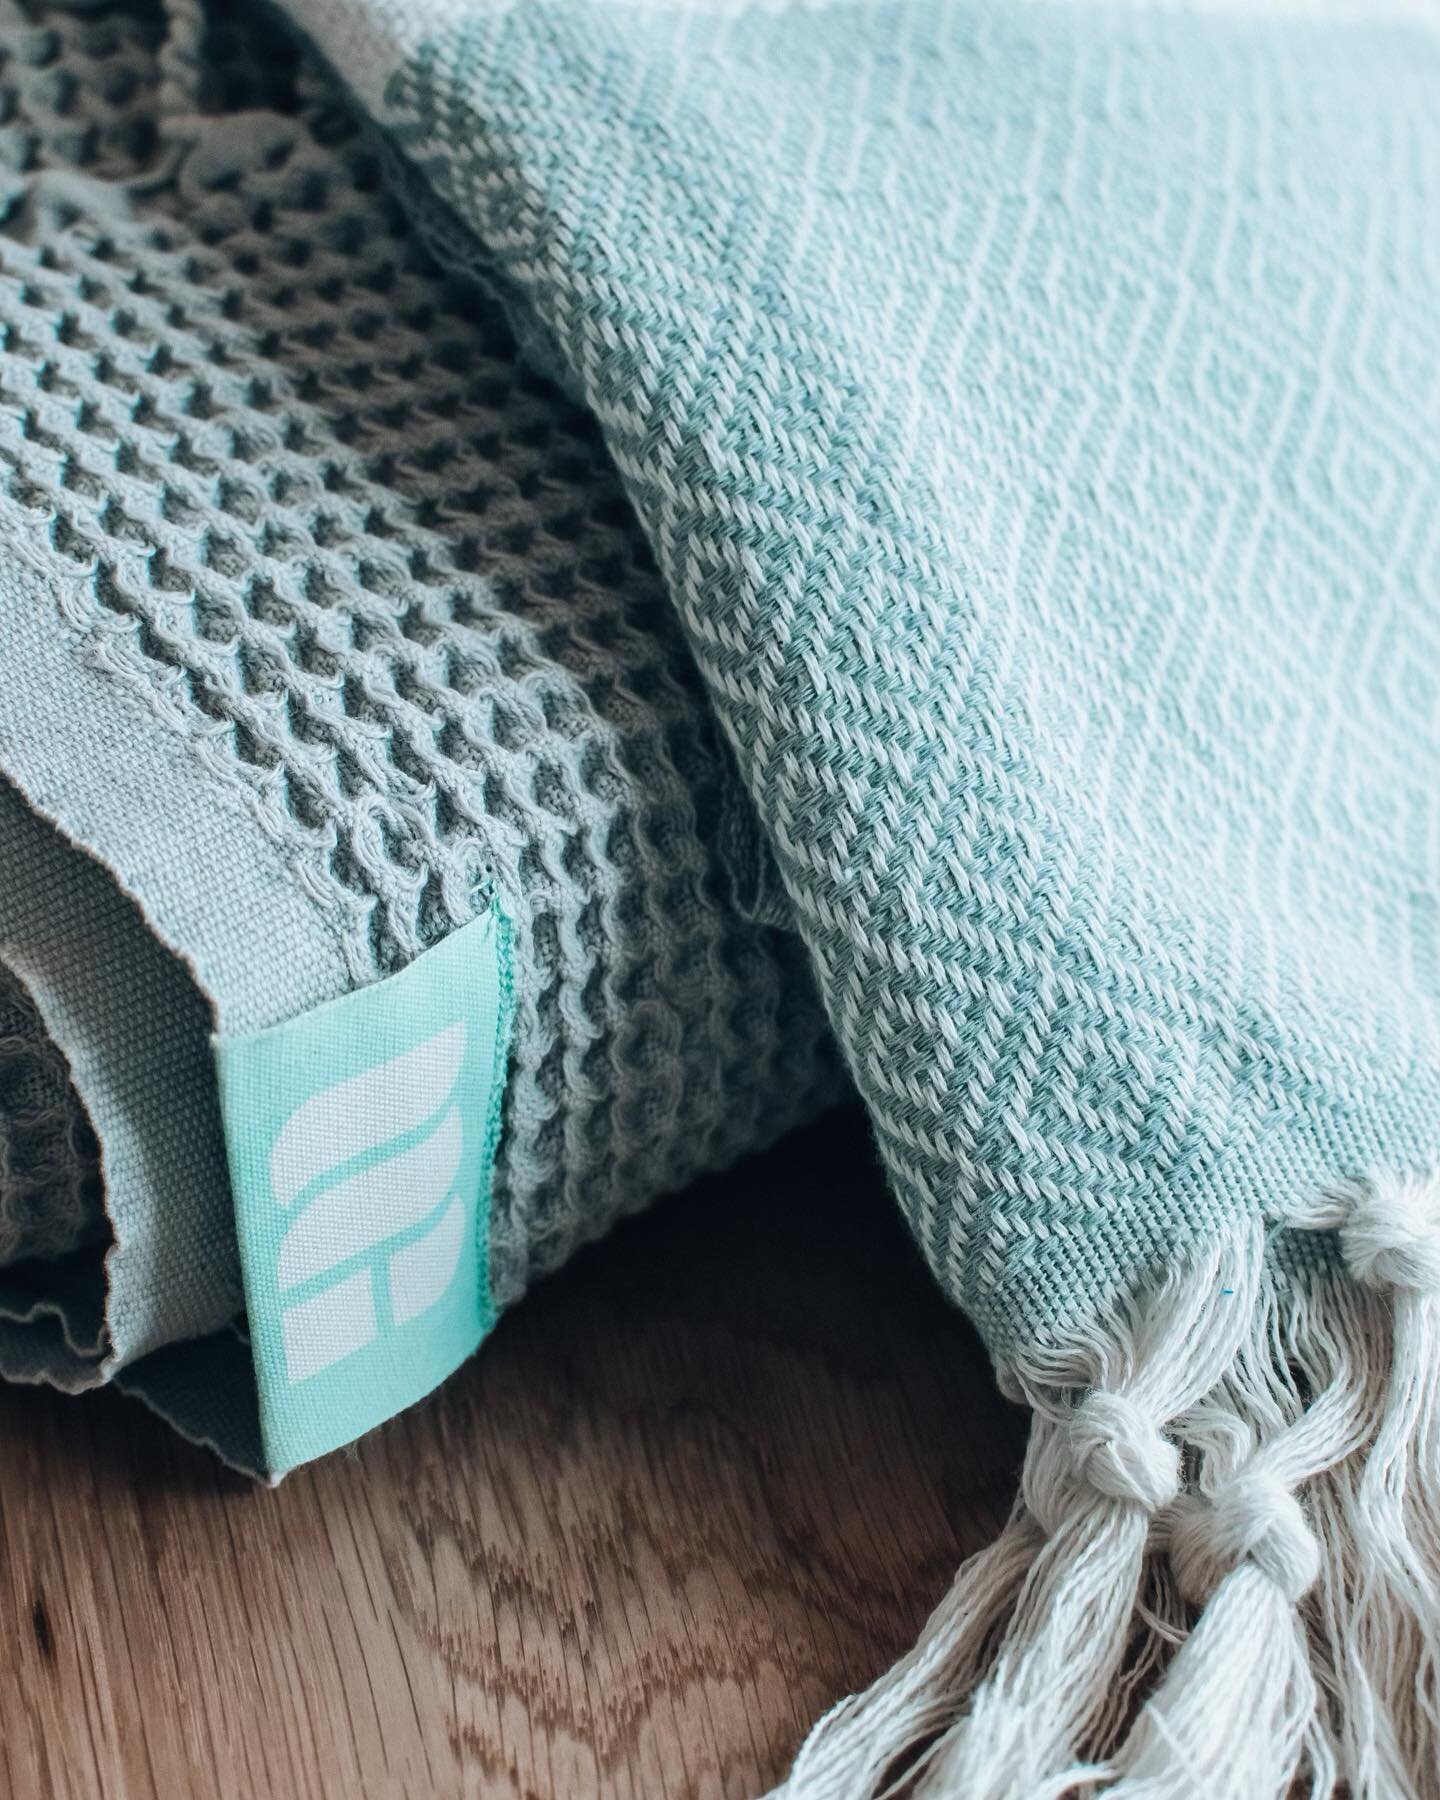 Mint + Grey

These gorgeous Turkish towels are 100% cotton, quick drying and so versatile. 

The amazing Samru @themintandgrey puts so much passionate into her business and it shows. You can find her this weekend at the Spruce Meadows Christmas Marke